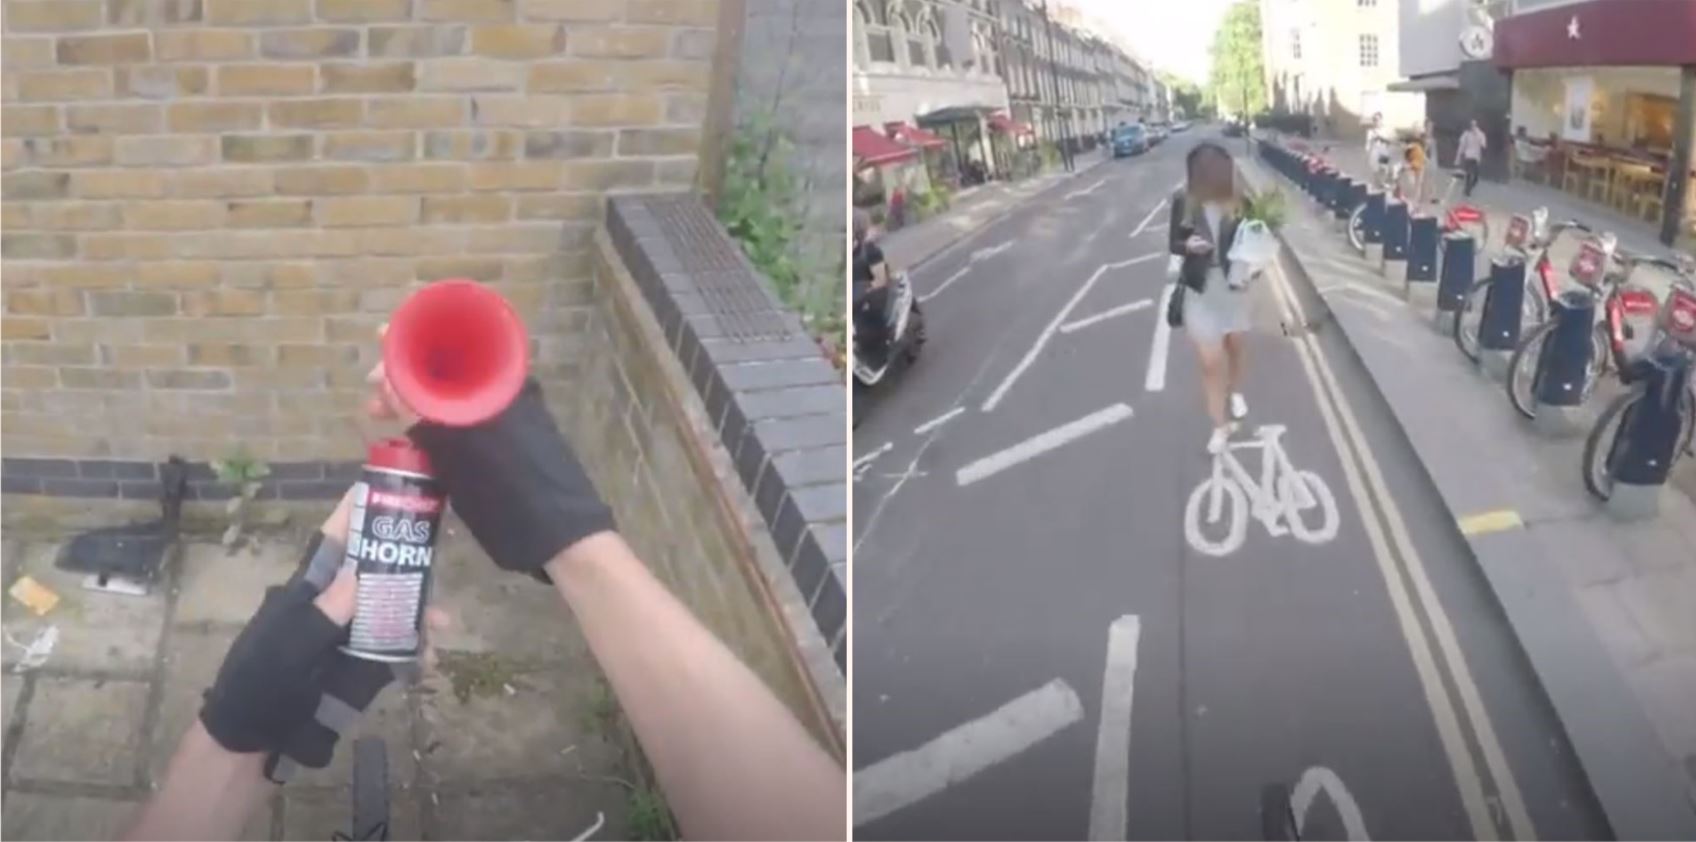 Fed up cyclist attaches air-horn to bike to get pedestrians to move out of the way